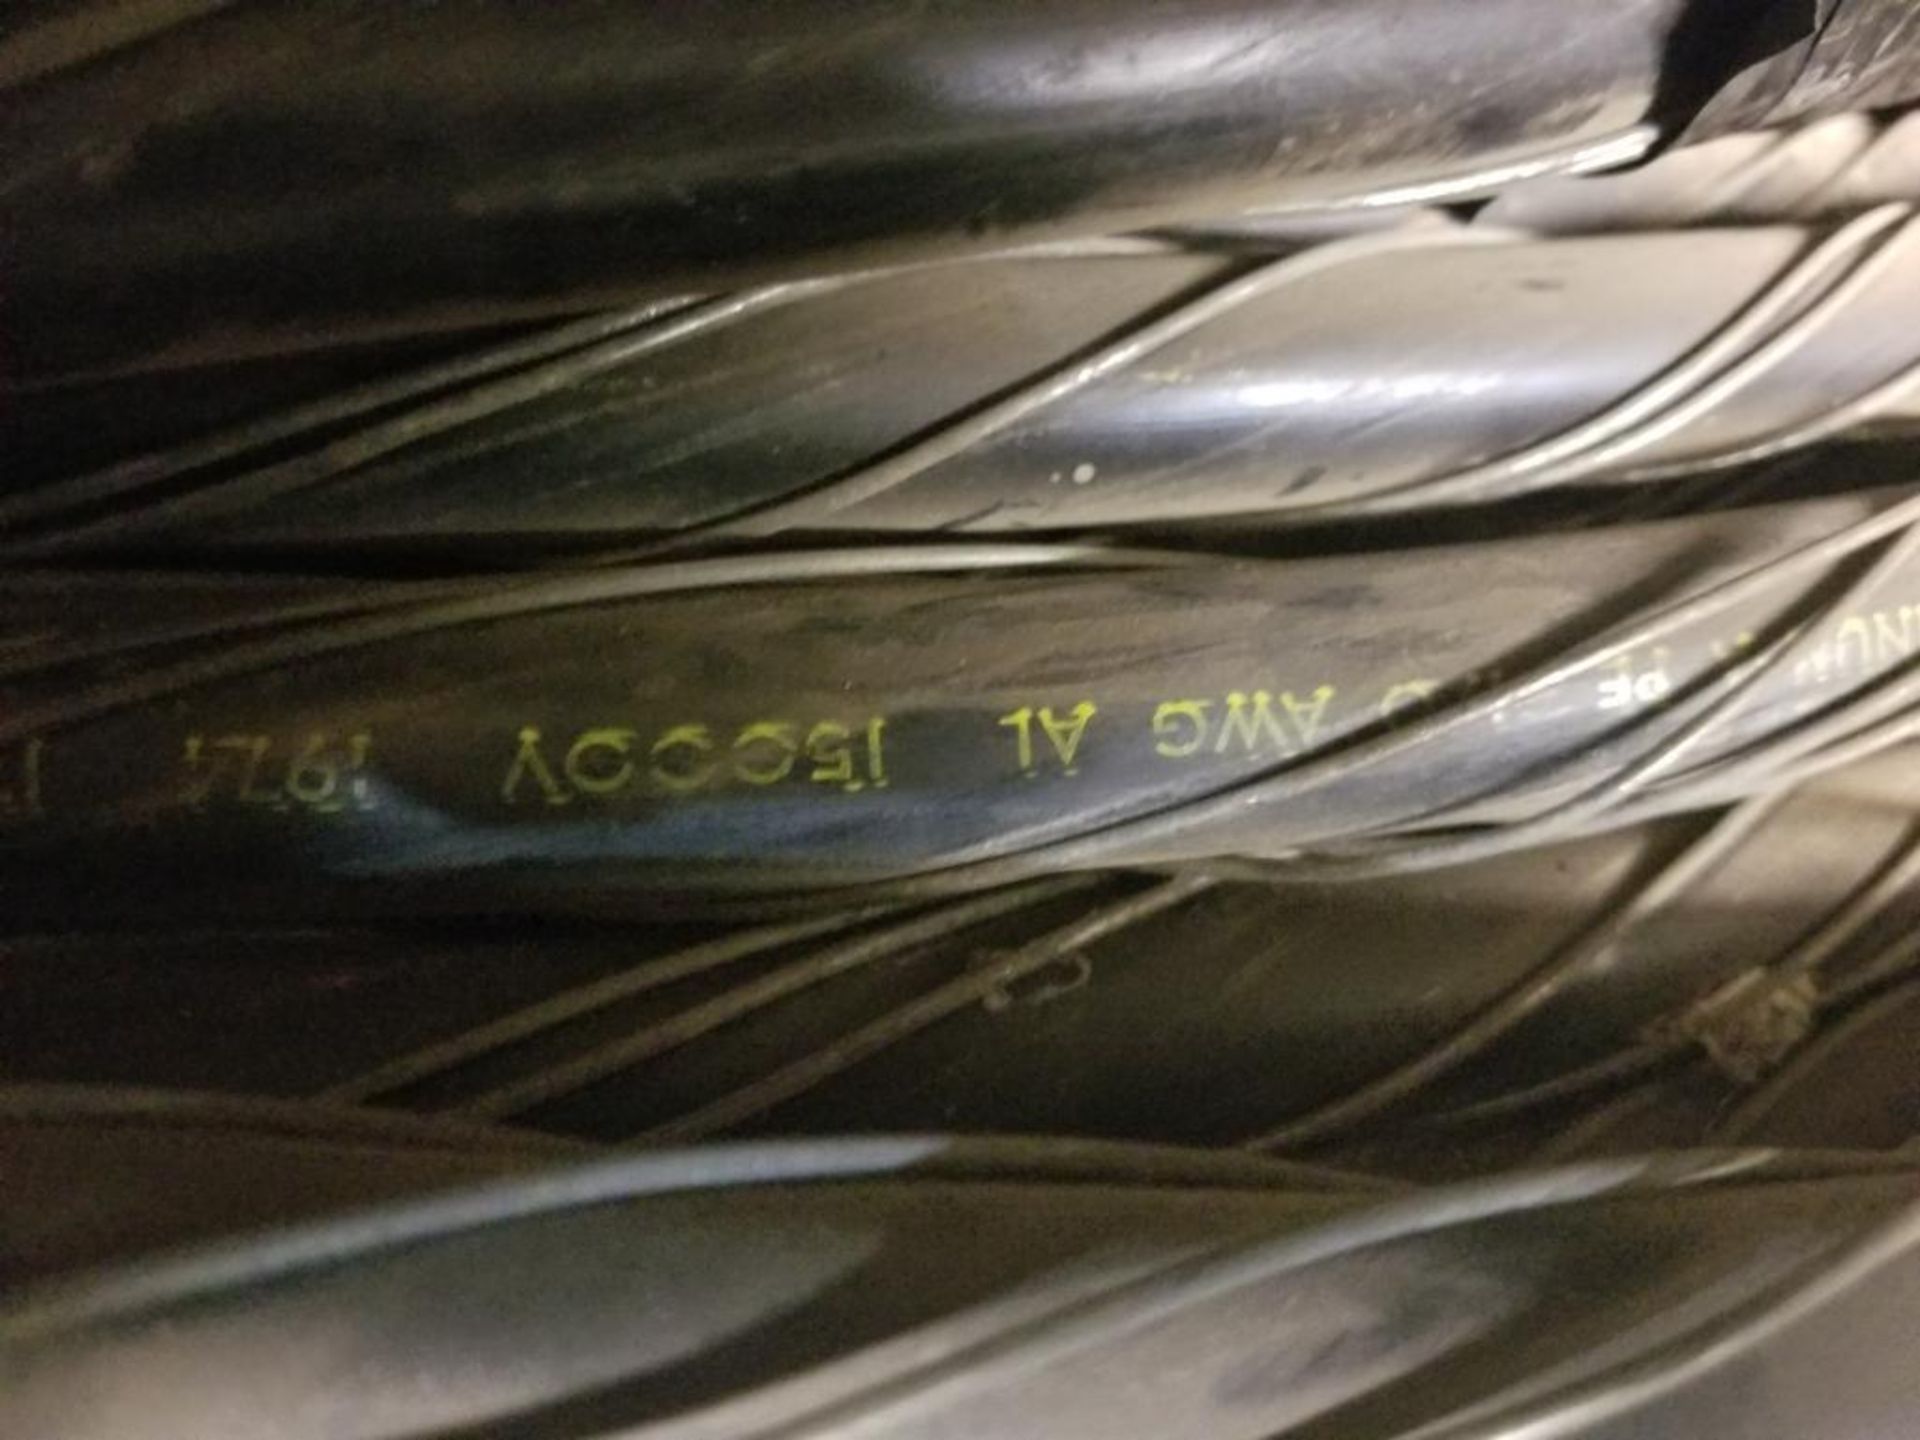 Pallet of wire. - Image 2 of 7